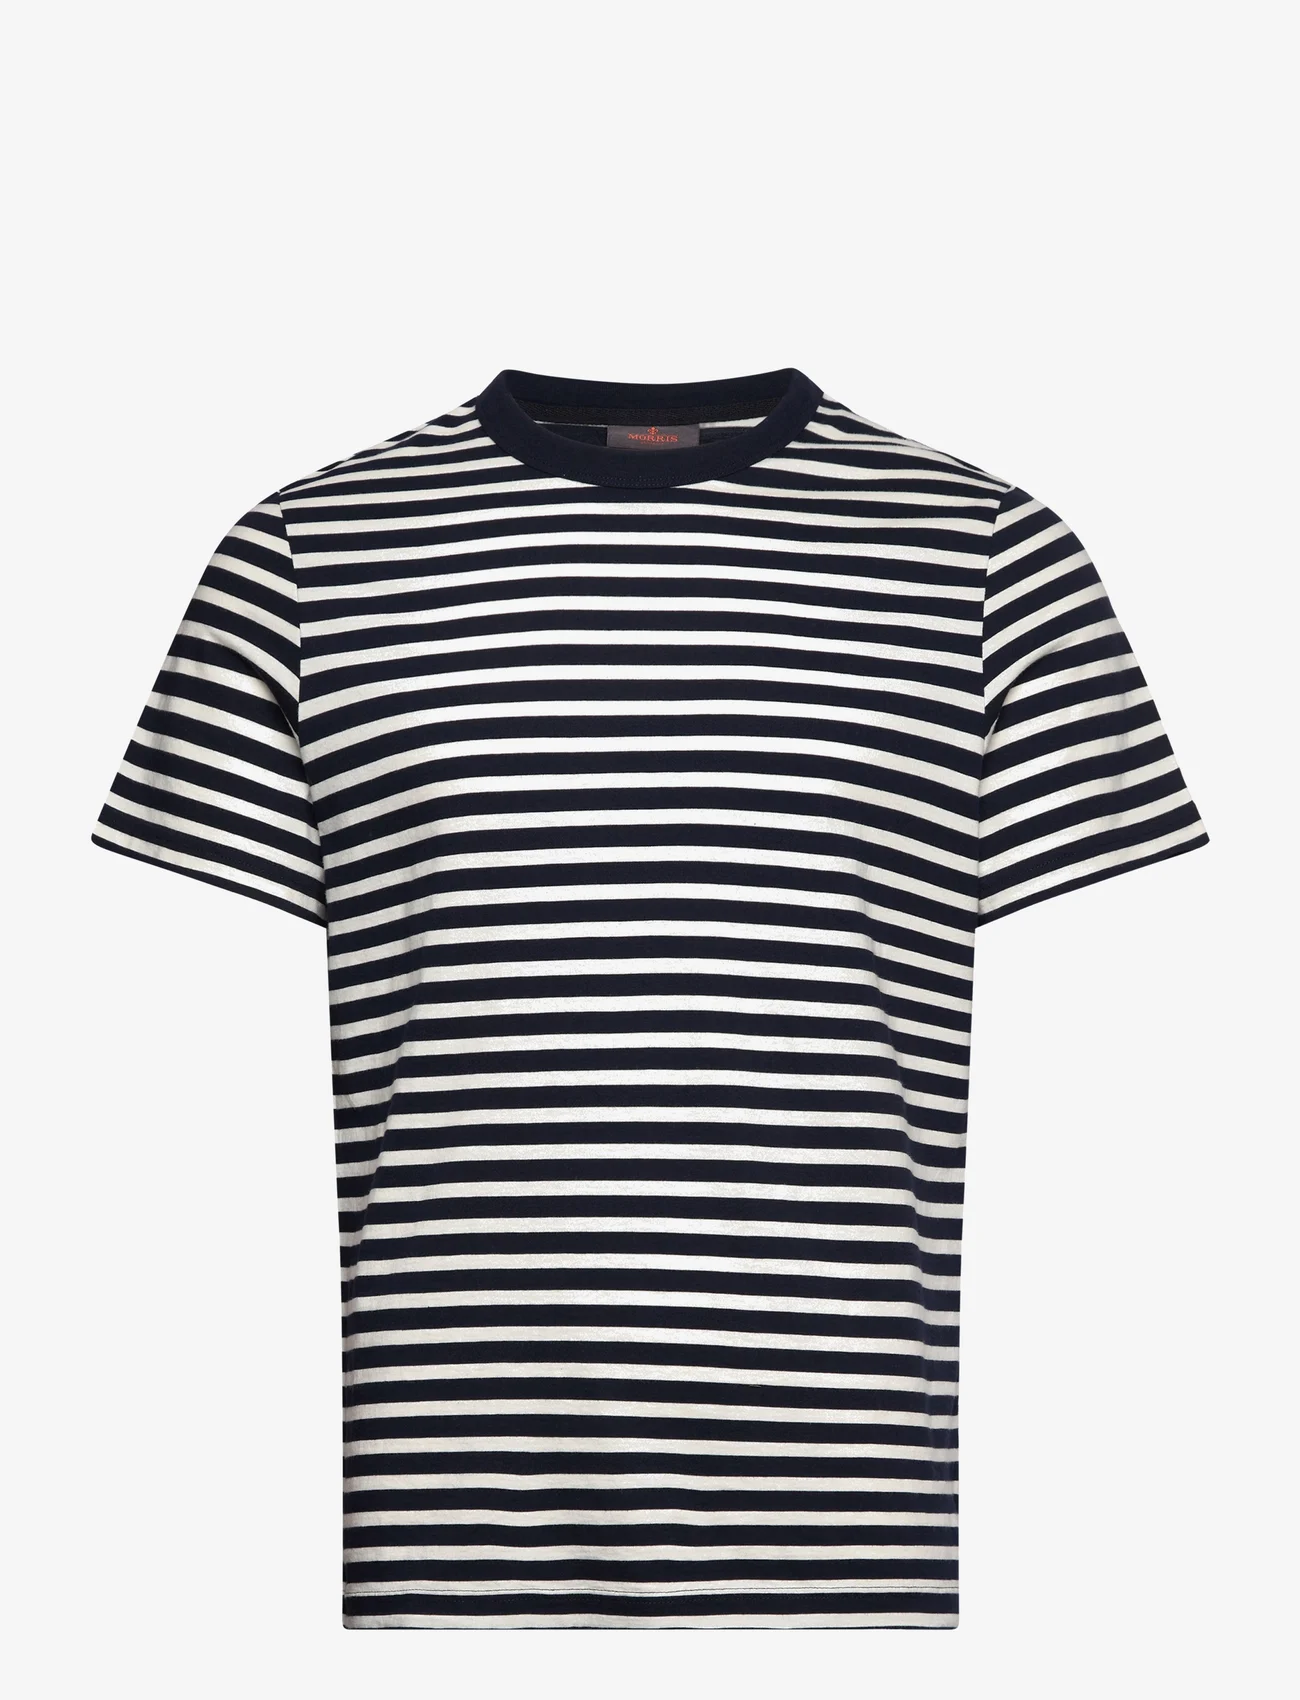 Morris - Durwin Striped Tee - nordic style - old blue - 0